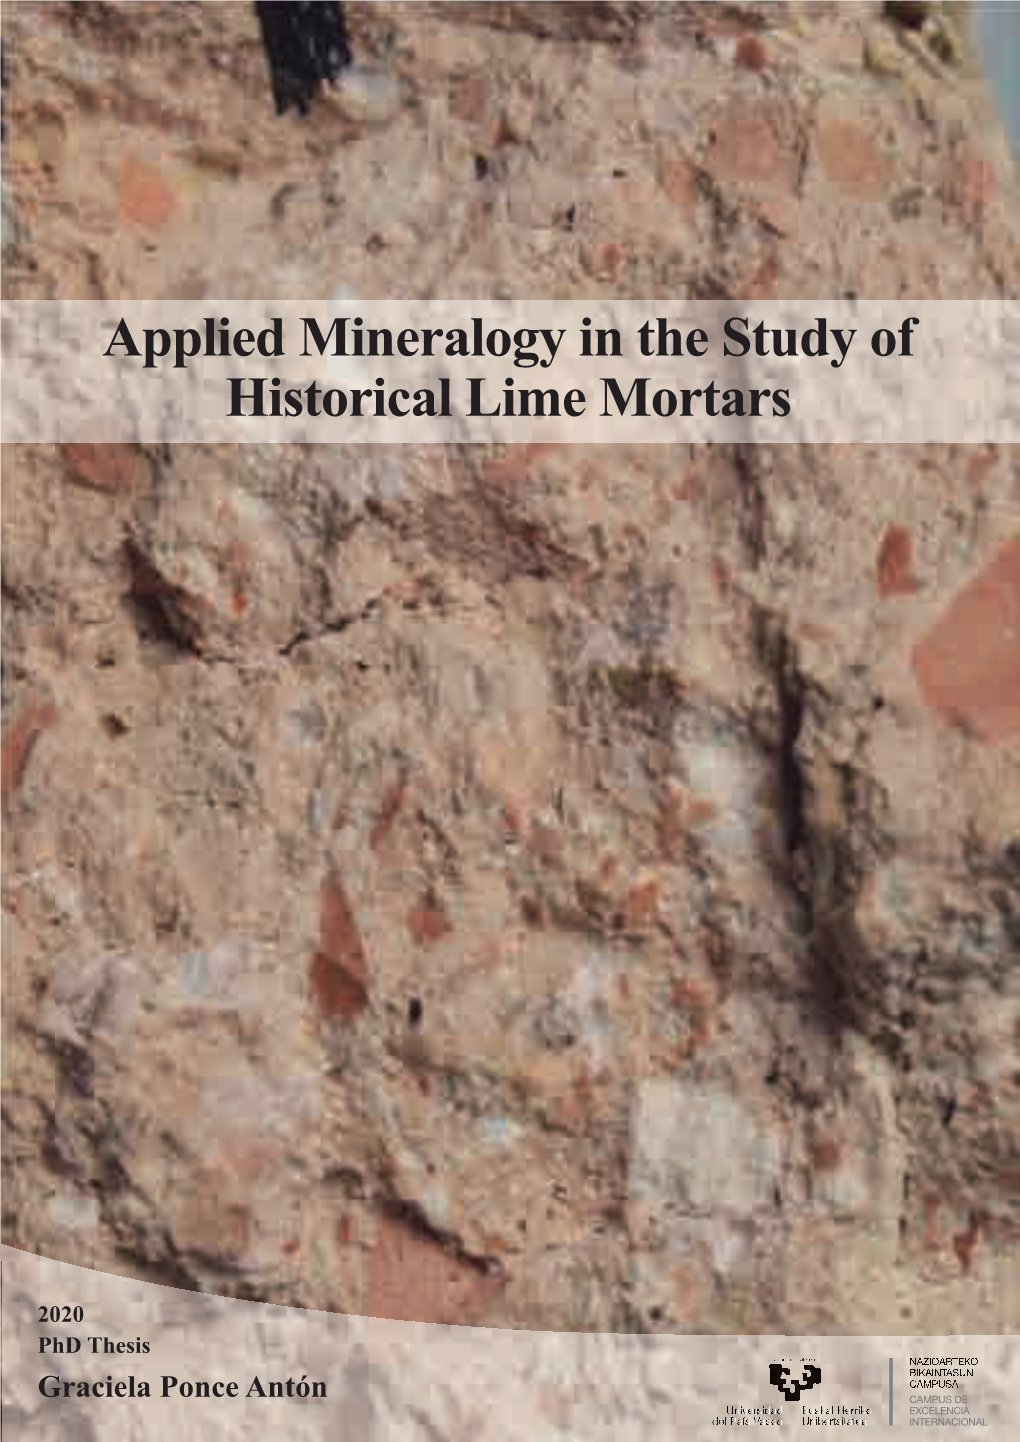 Applied Mineralogy in the Study of Historical Lime Mortars